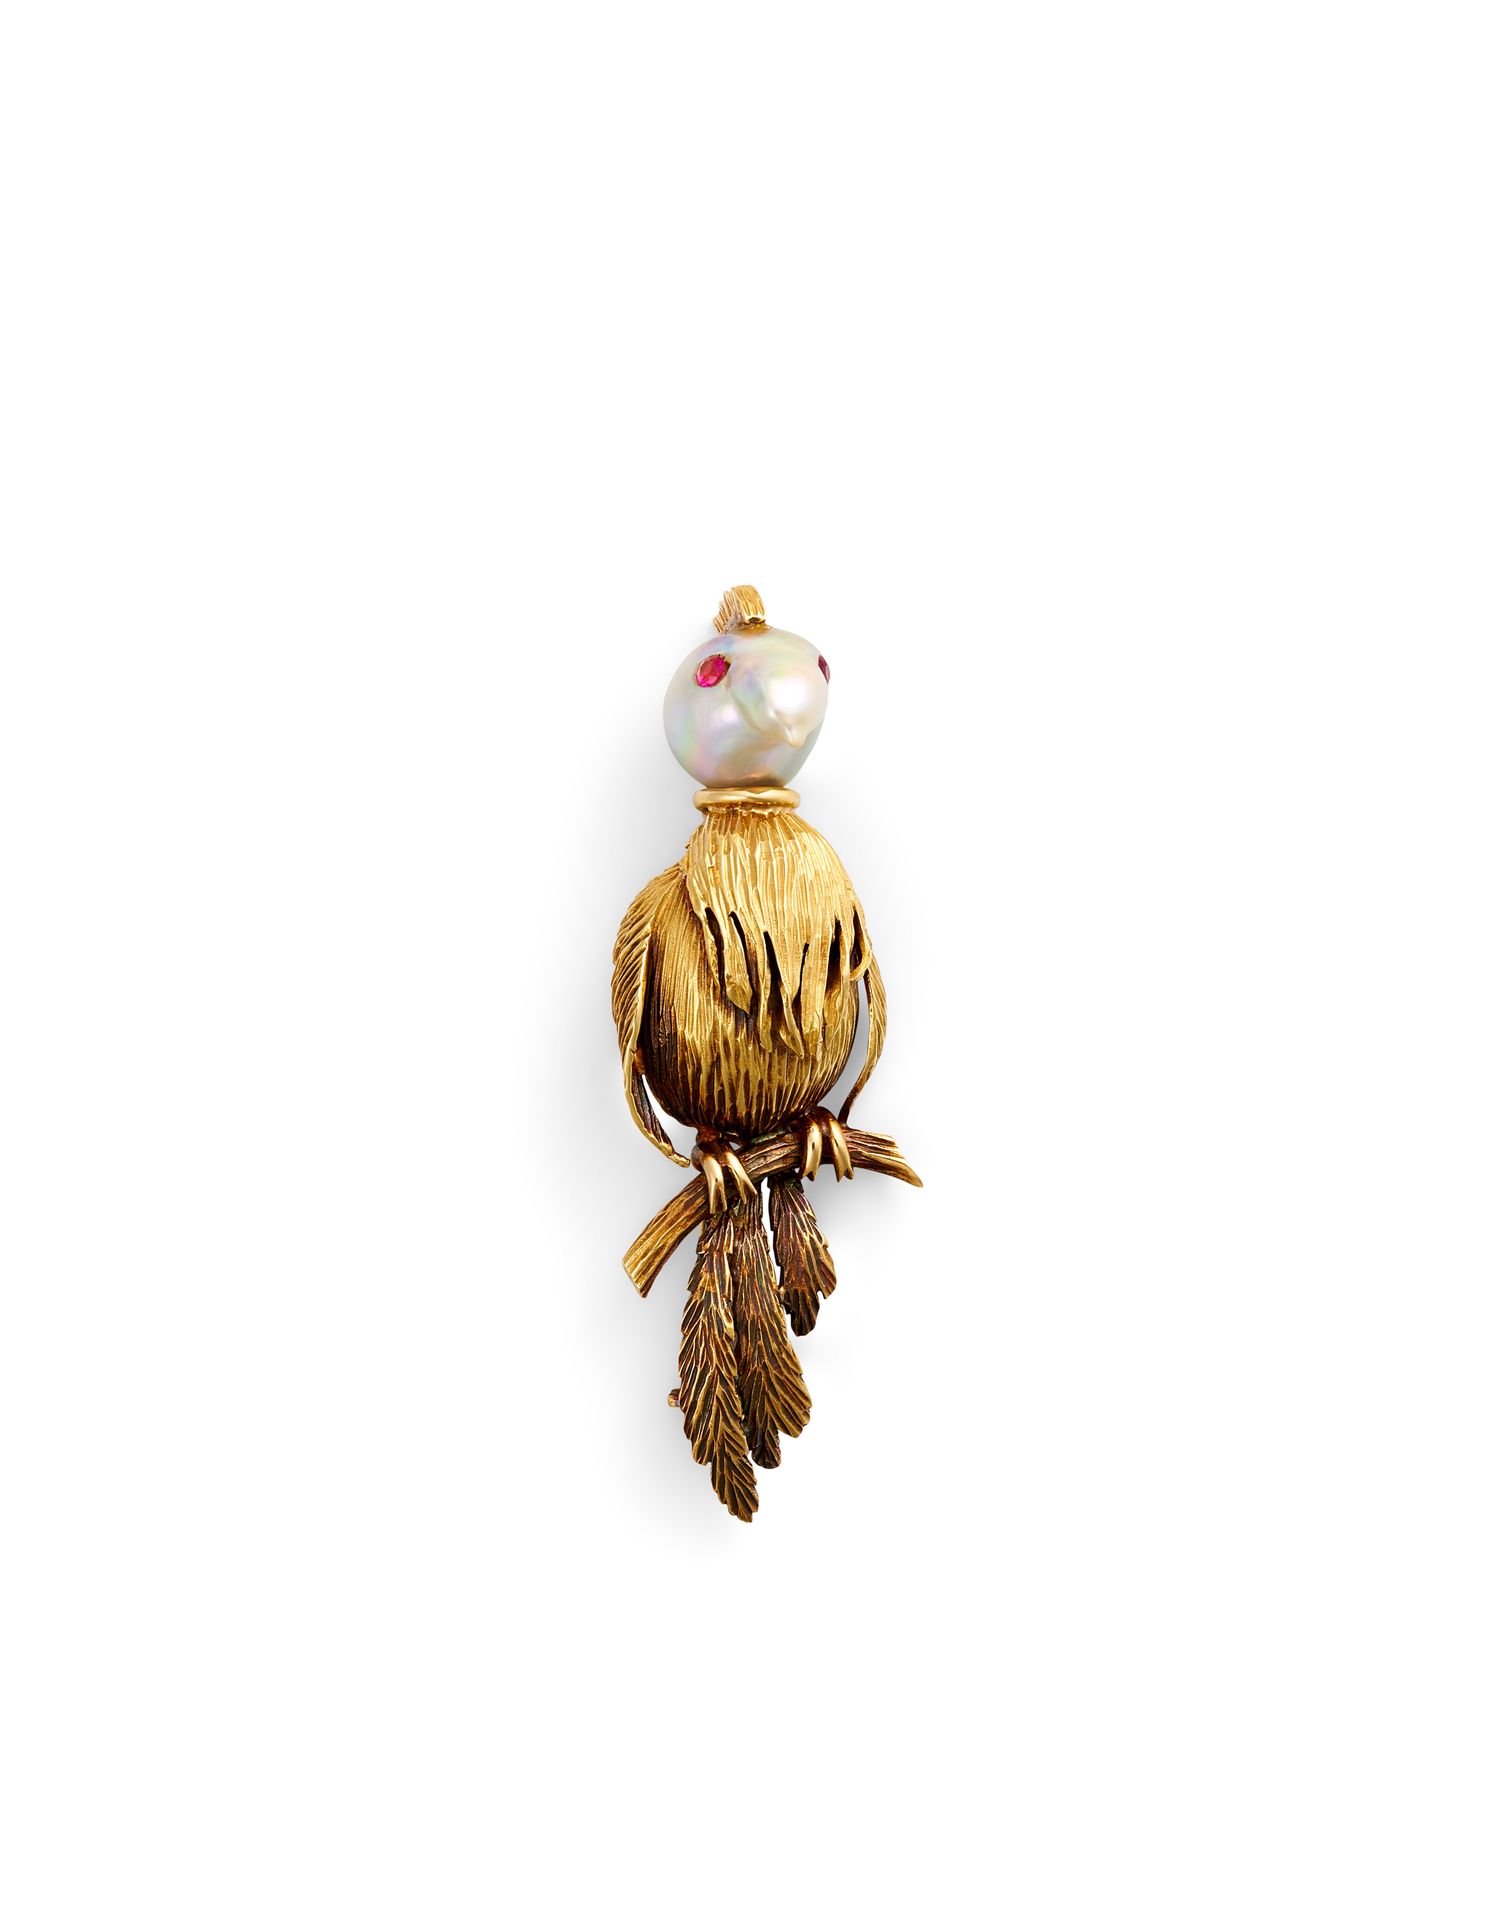 Null PAUL BERTRAND PARROT BROOCH In 18K yellow gold, with a baroque pearl head a&hellip;